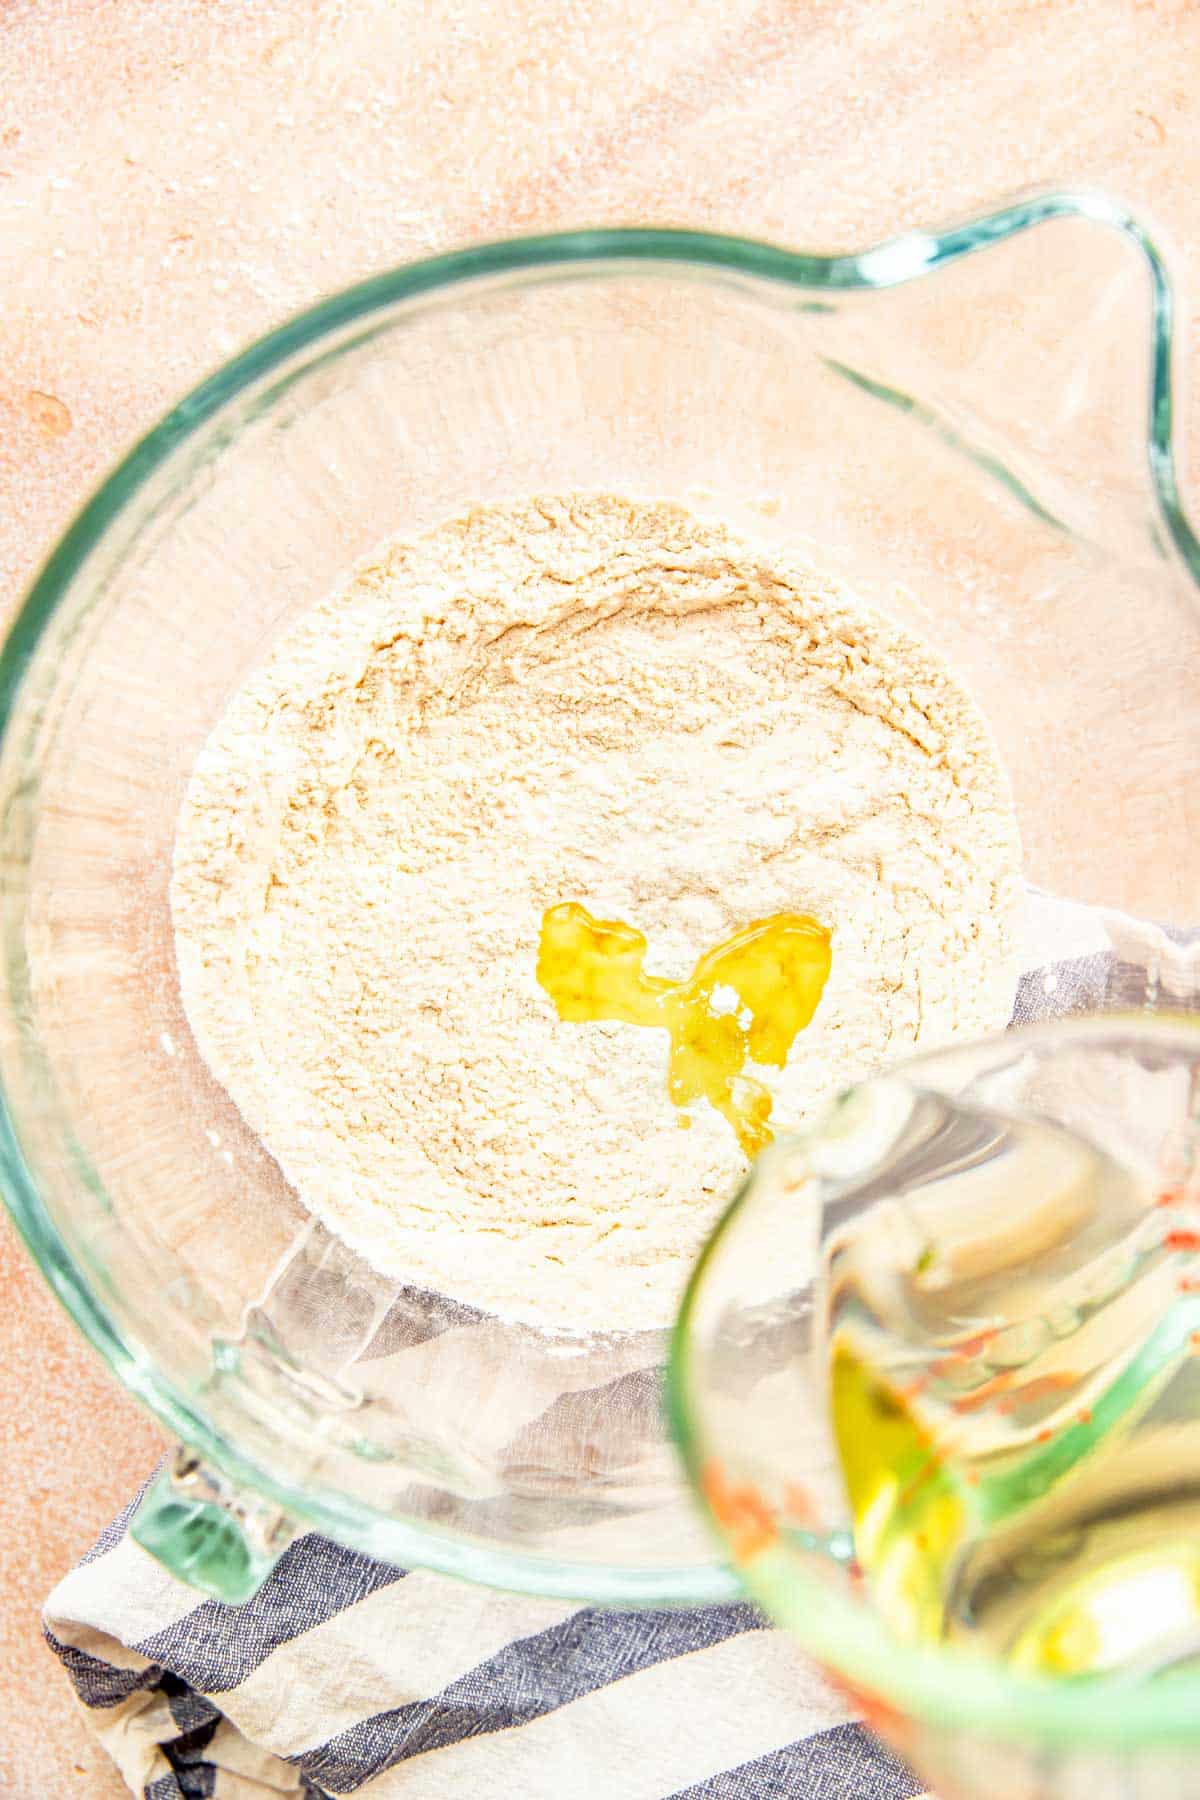 flour in a glass standing mixer bowl with oil being added to the bowl